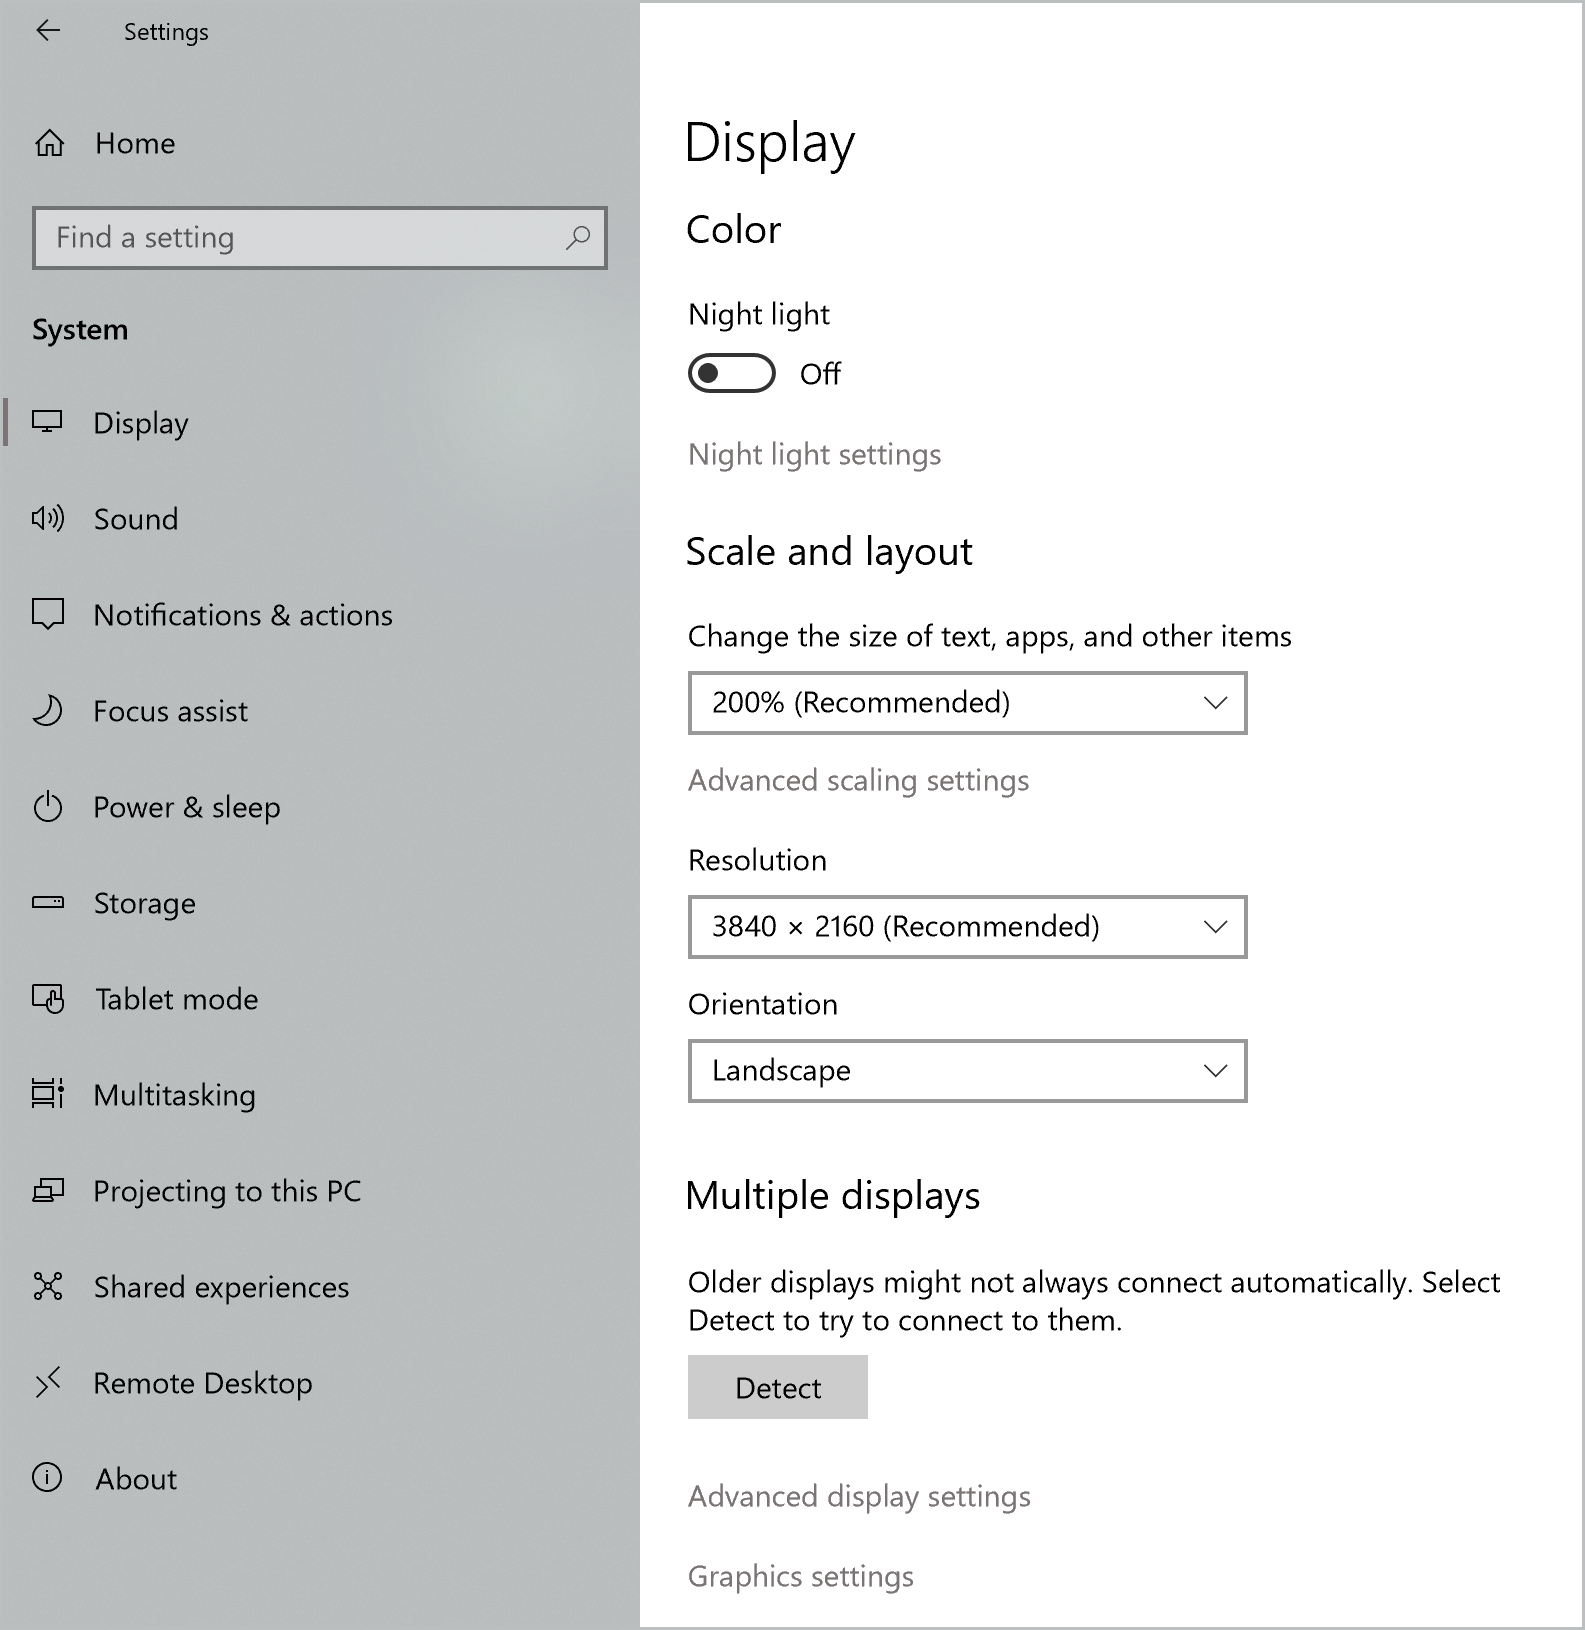 Screenshot of the Display page in Settings.